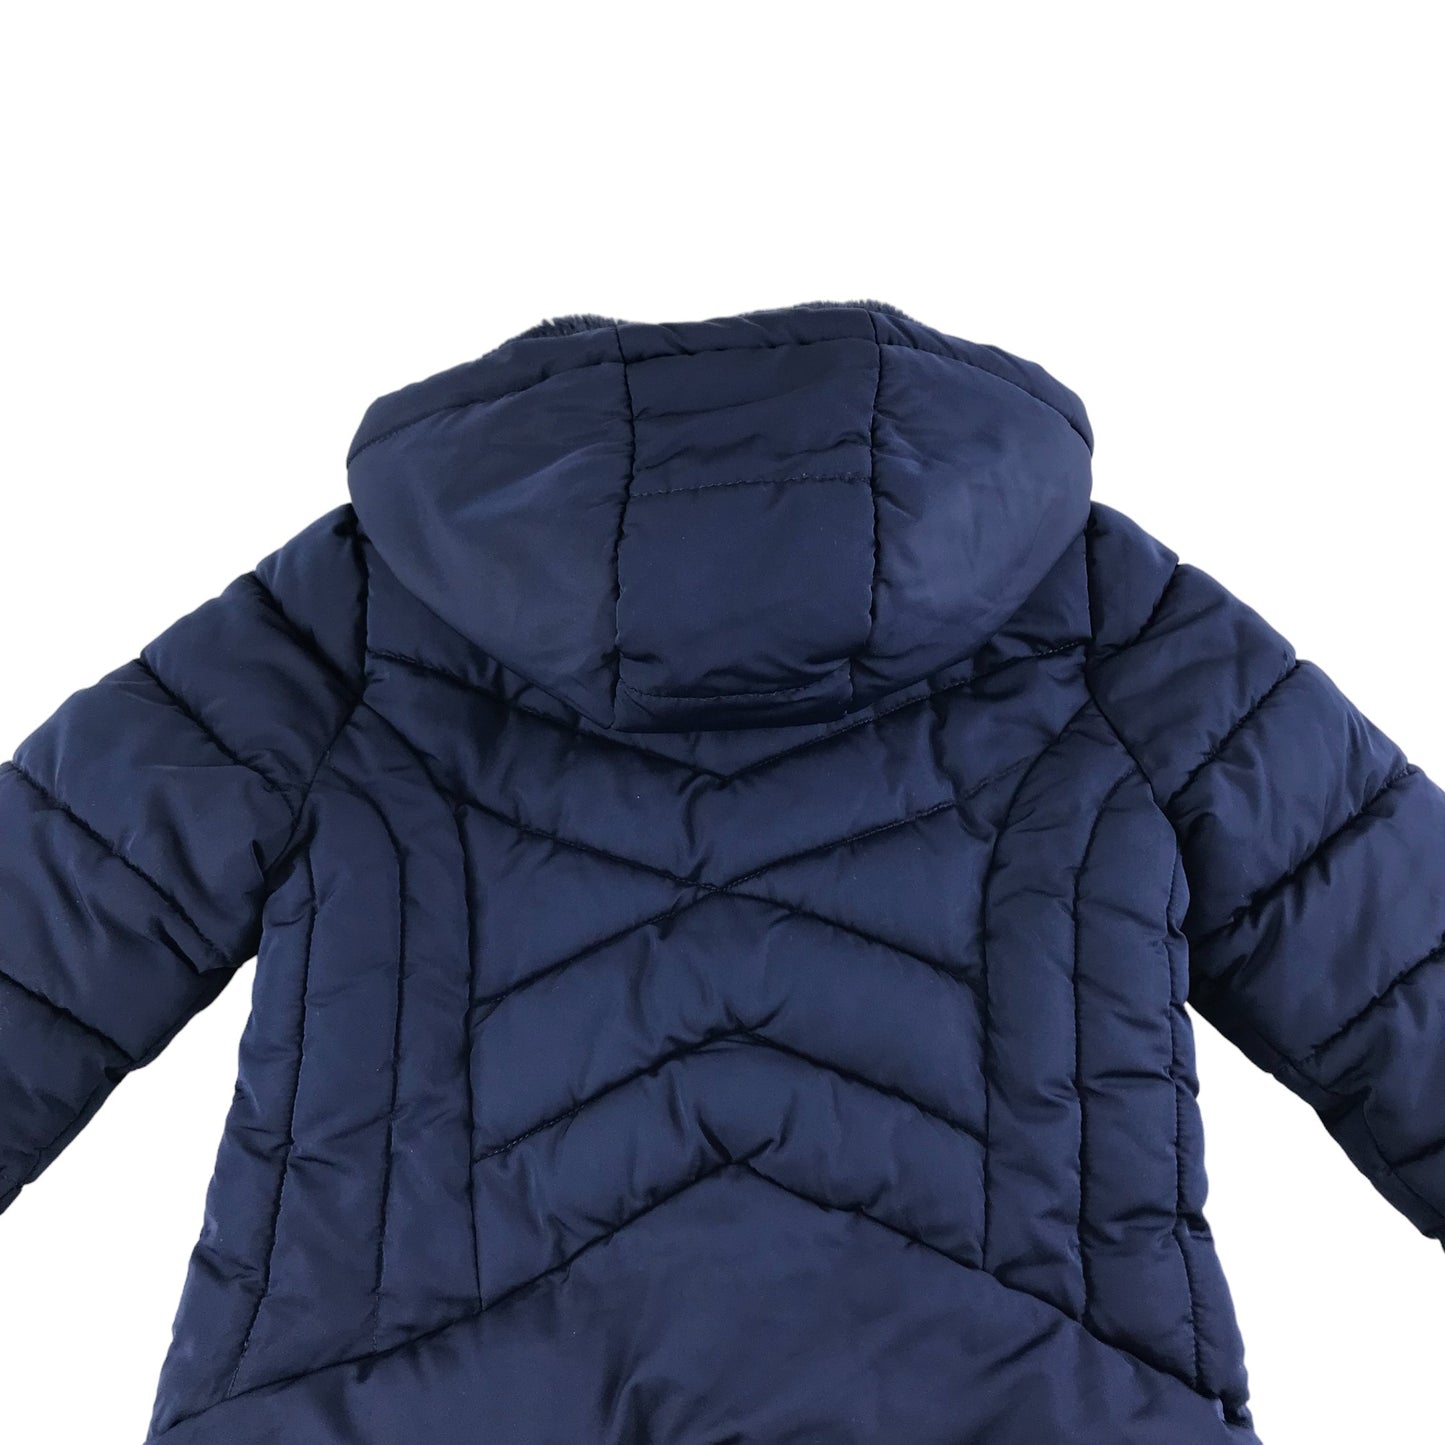 George Jacket Age 5 Navy Blue Parka Faux Fur lining with Hood